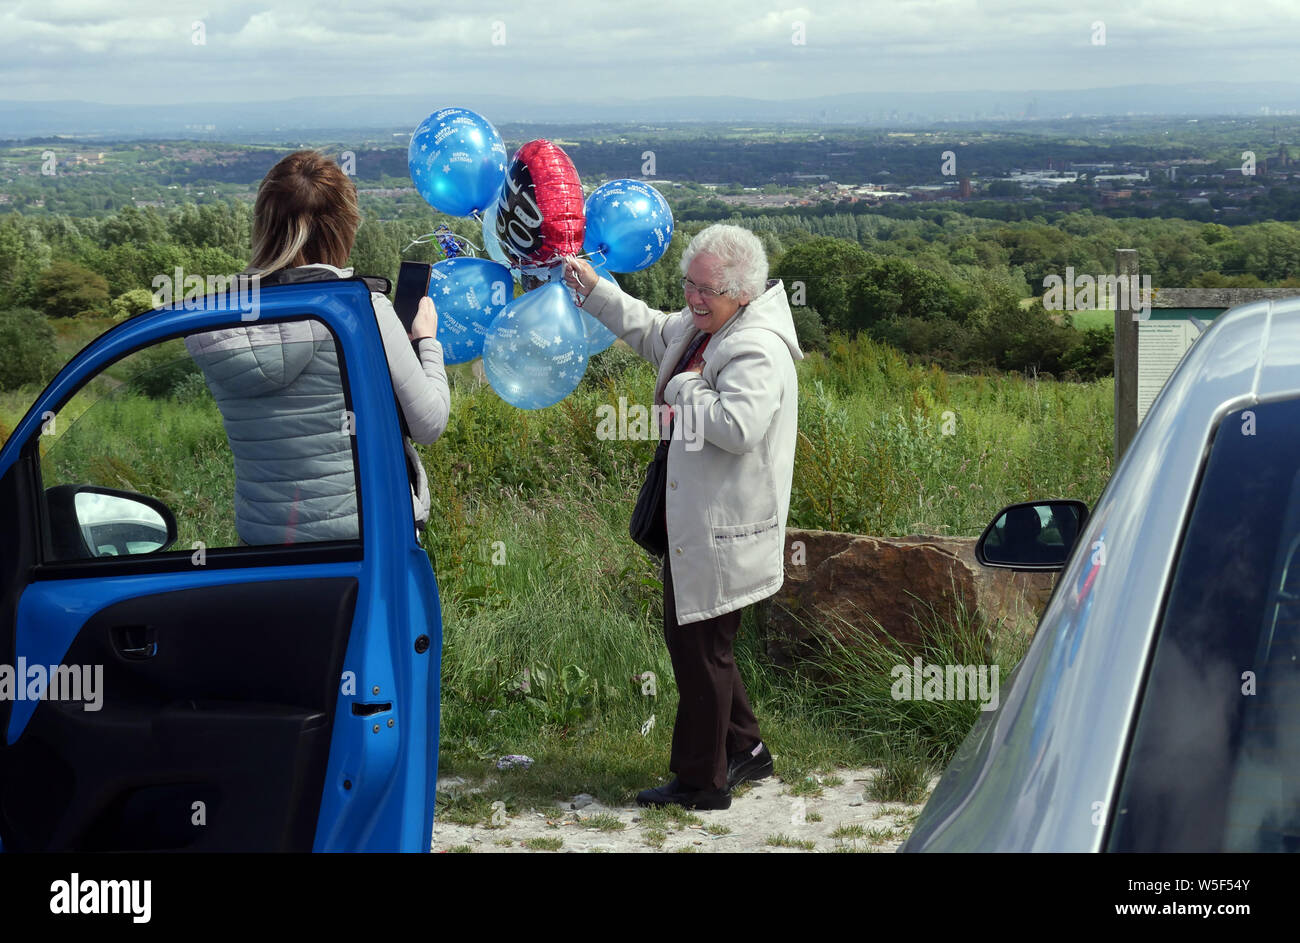 Elderly lady releasing balloons, one balloon is a heart shape saying “Love You” as a young lady records the event with her smart phone on a car park Stock Photo